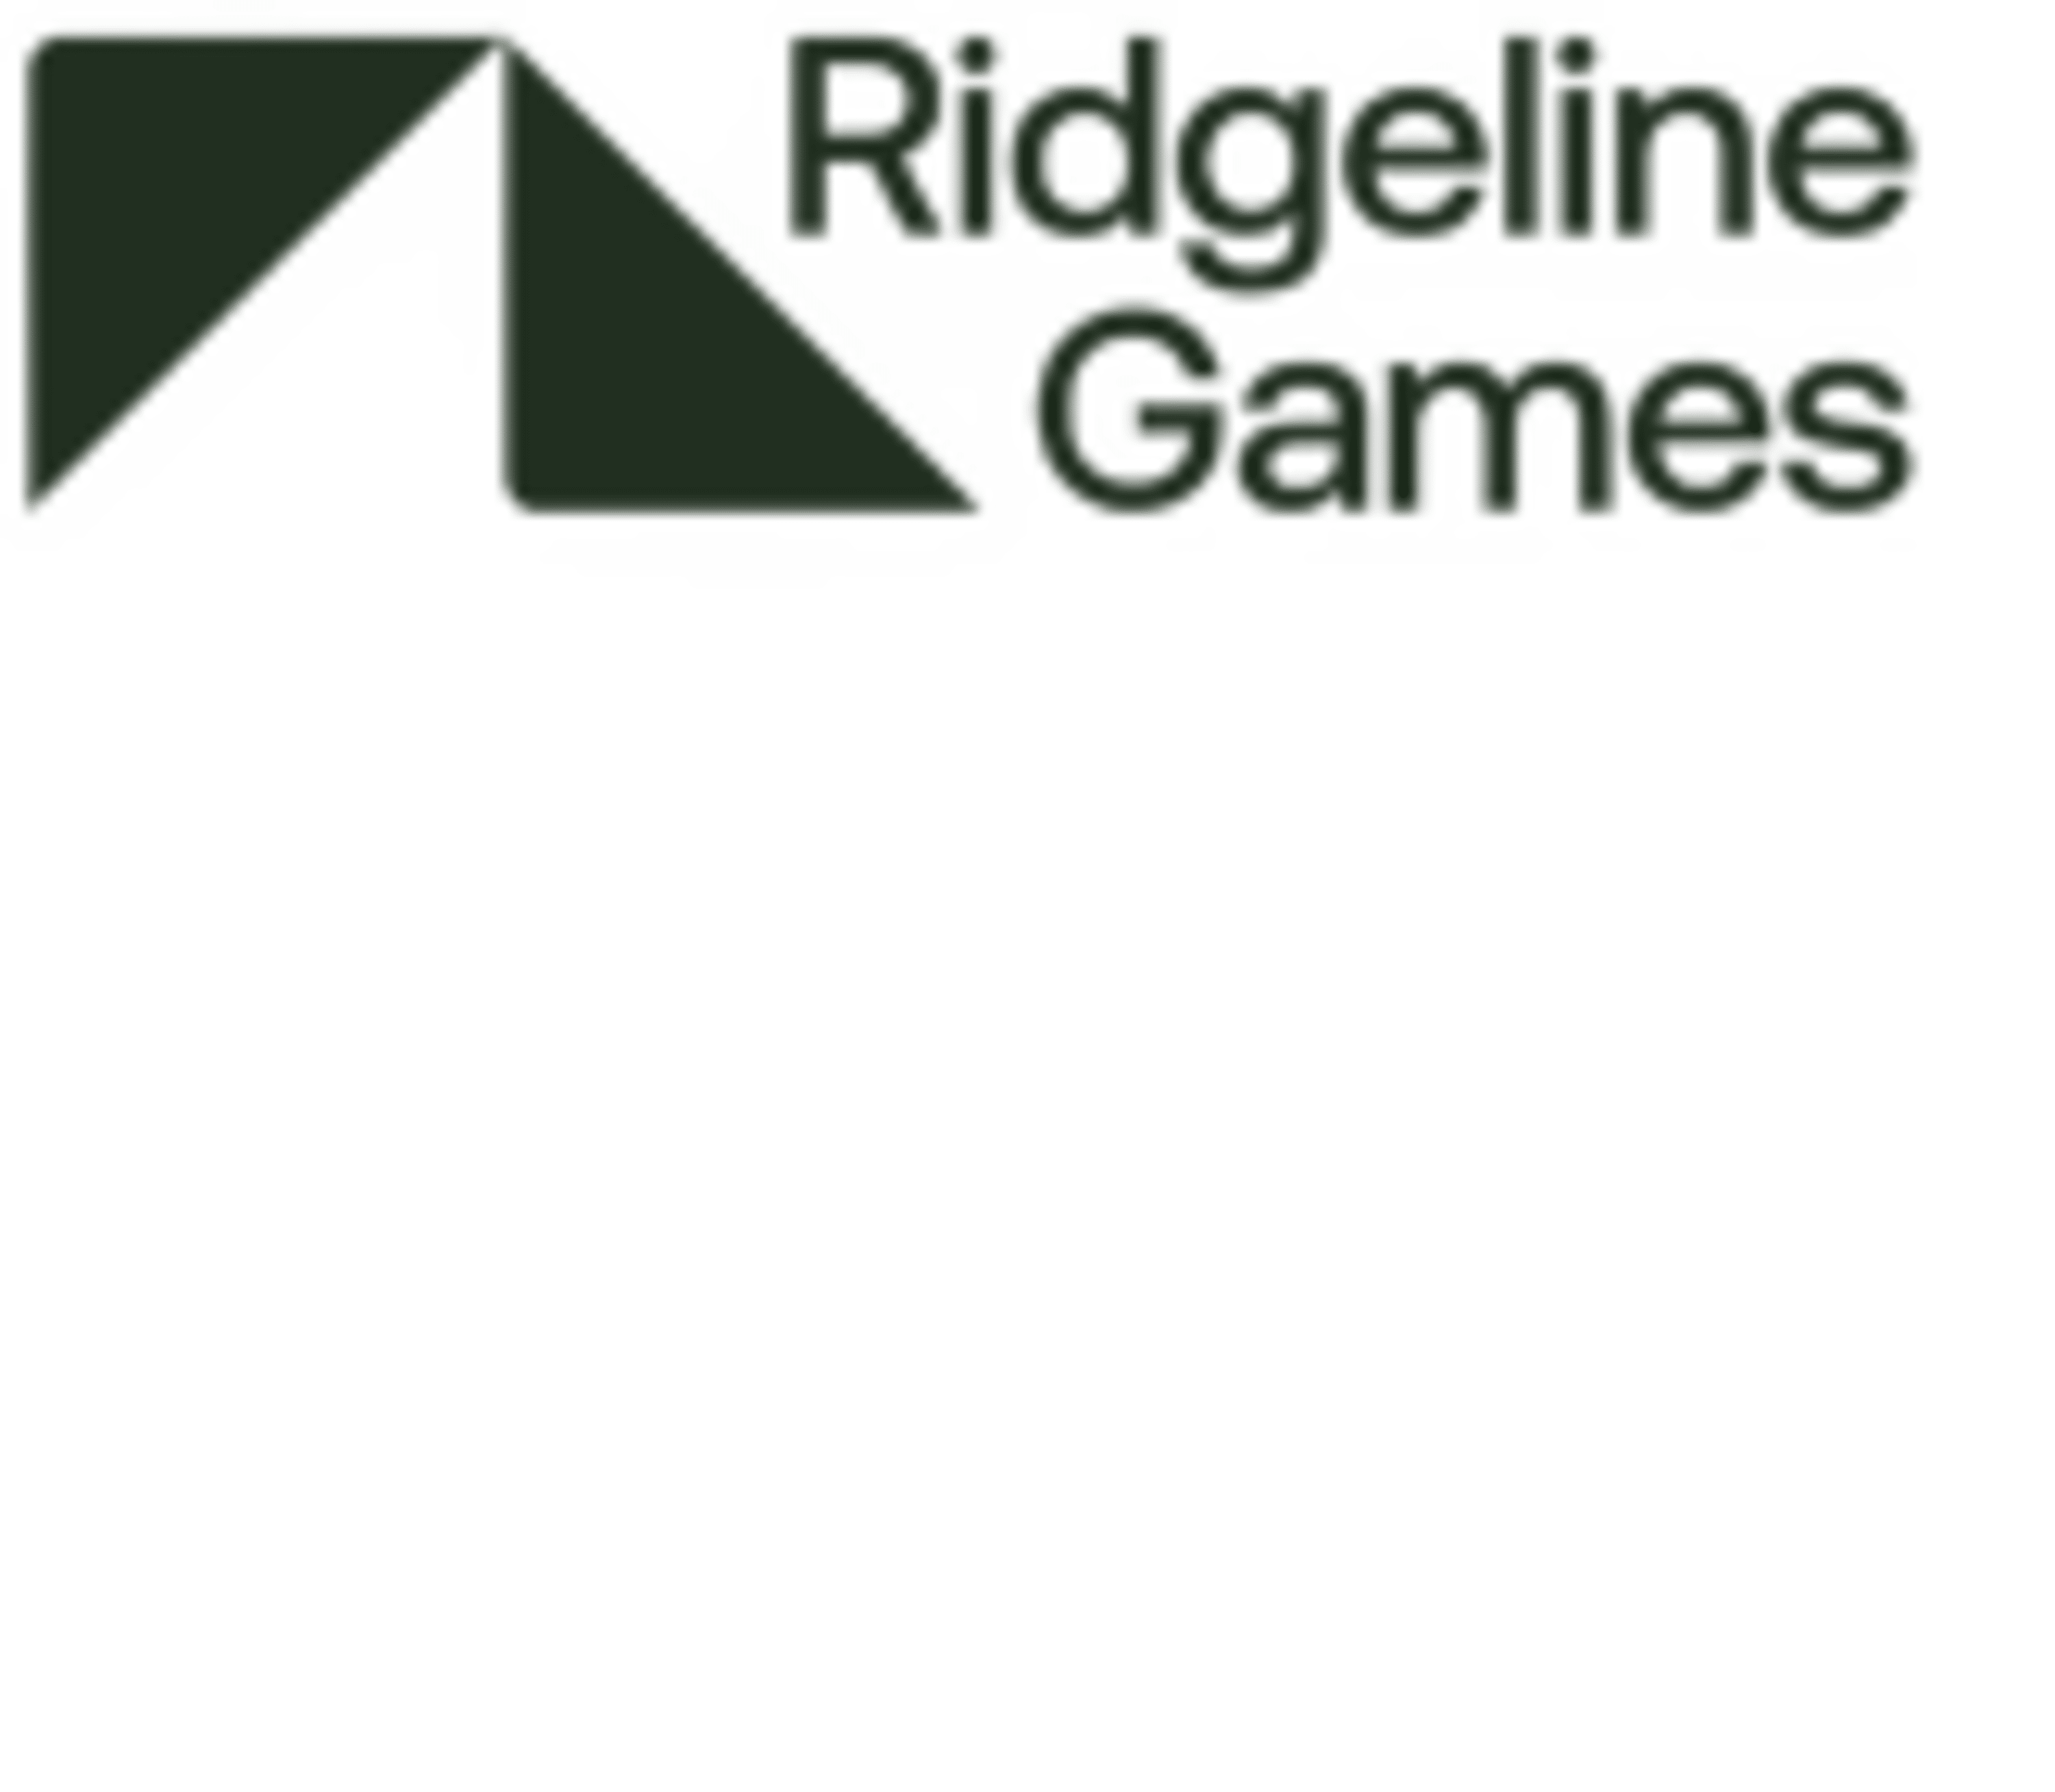 The Battlefield Narrative Campaign Will Be Developed By Ridgeline Games